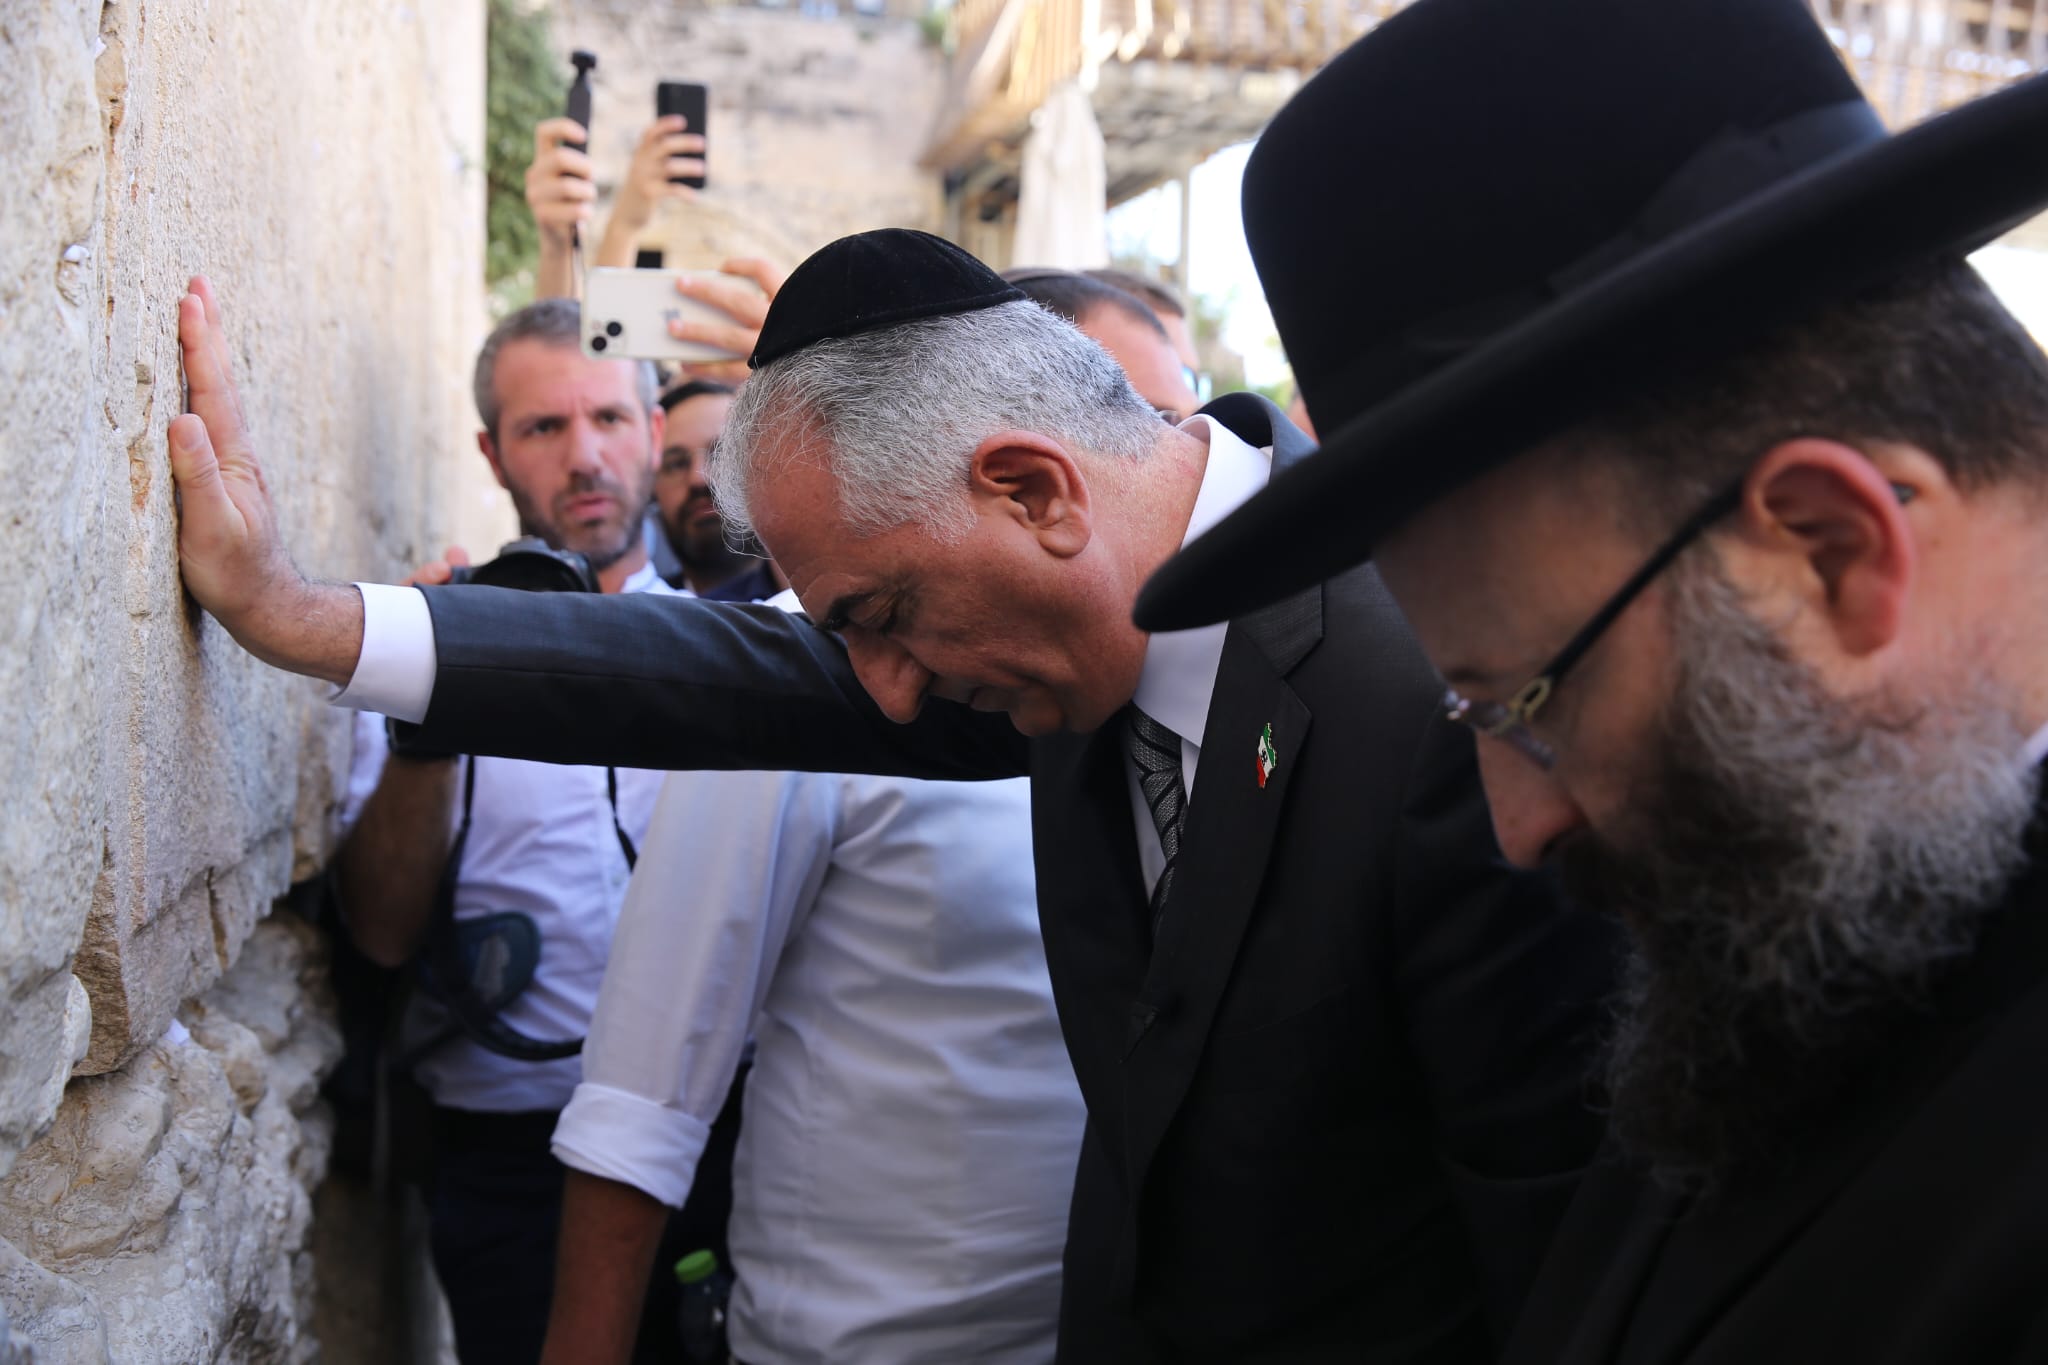 While visiting the Western Wall, the Iranian Crown Prince Reza Pahlavi ...